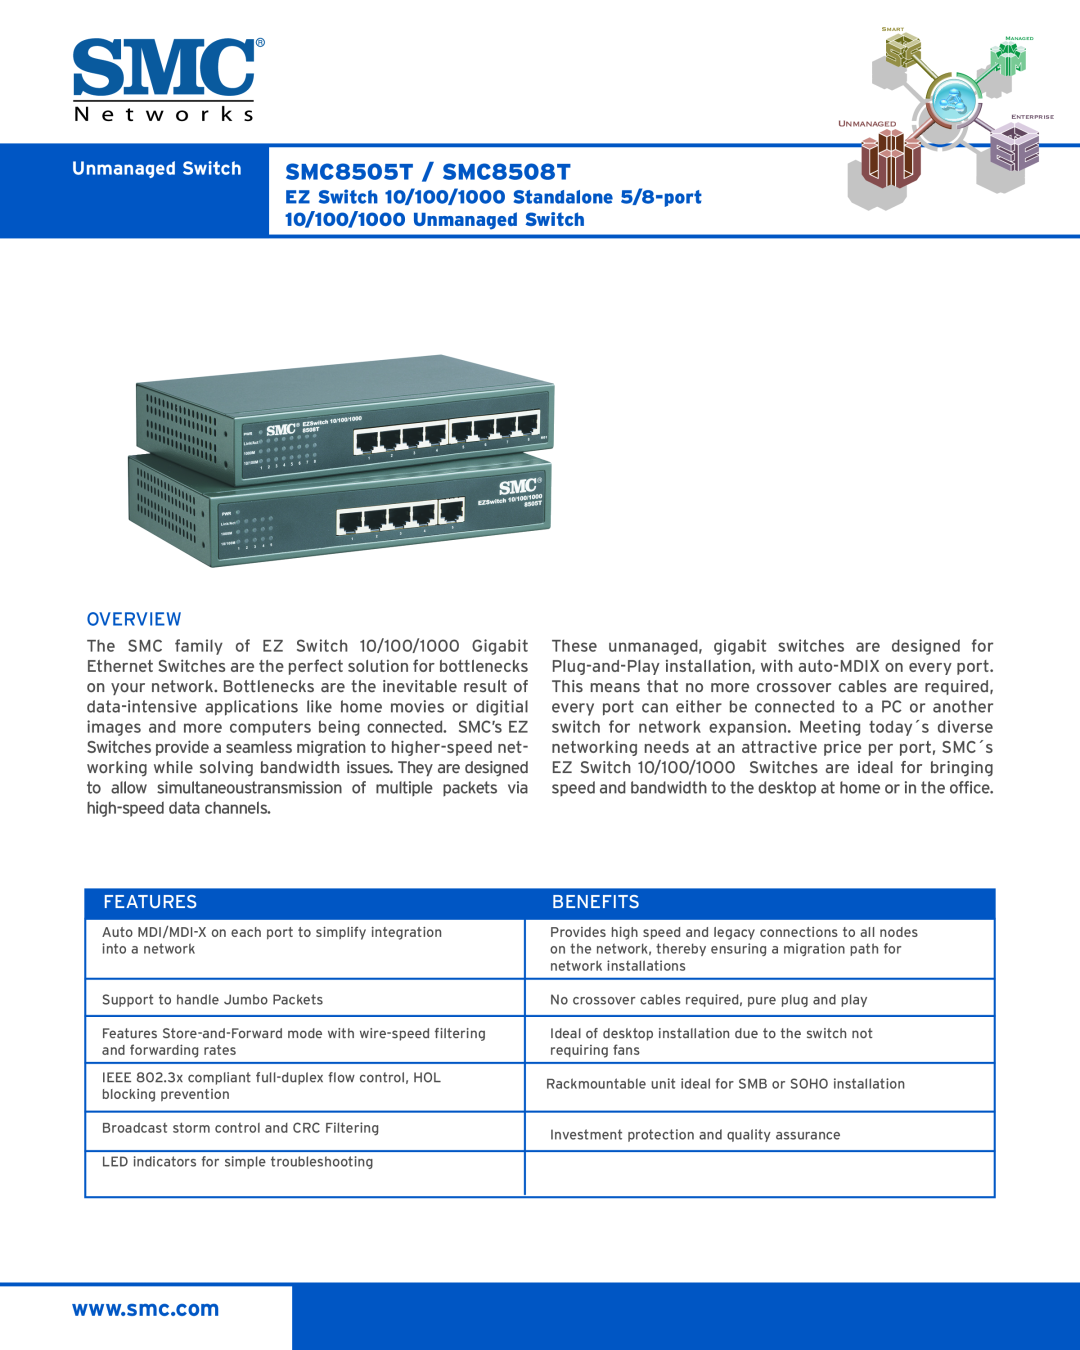 SMC Networks manual Unmanaged Switch SMC8505T / SMC8508T, EZ Switch 10/100/1000 Standalone 5/8-port, Overview, Features 